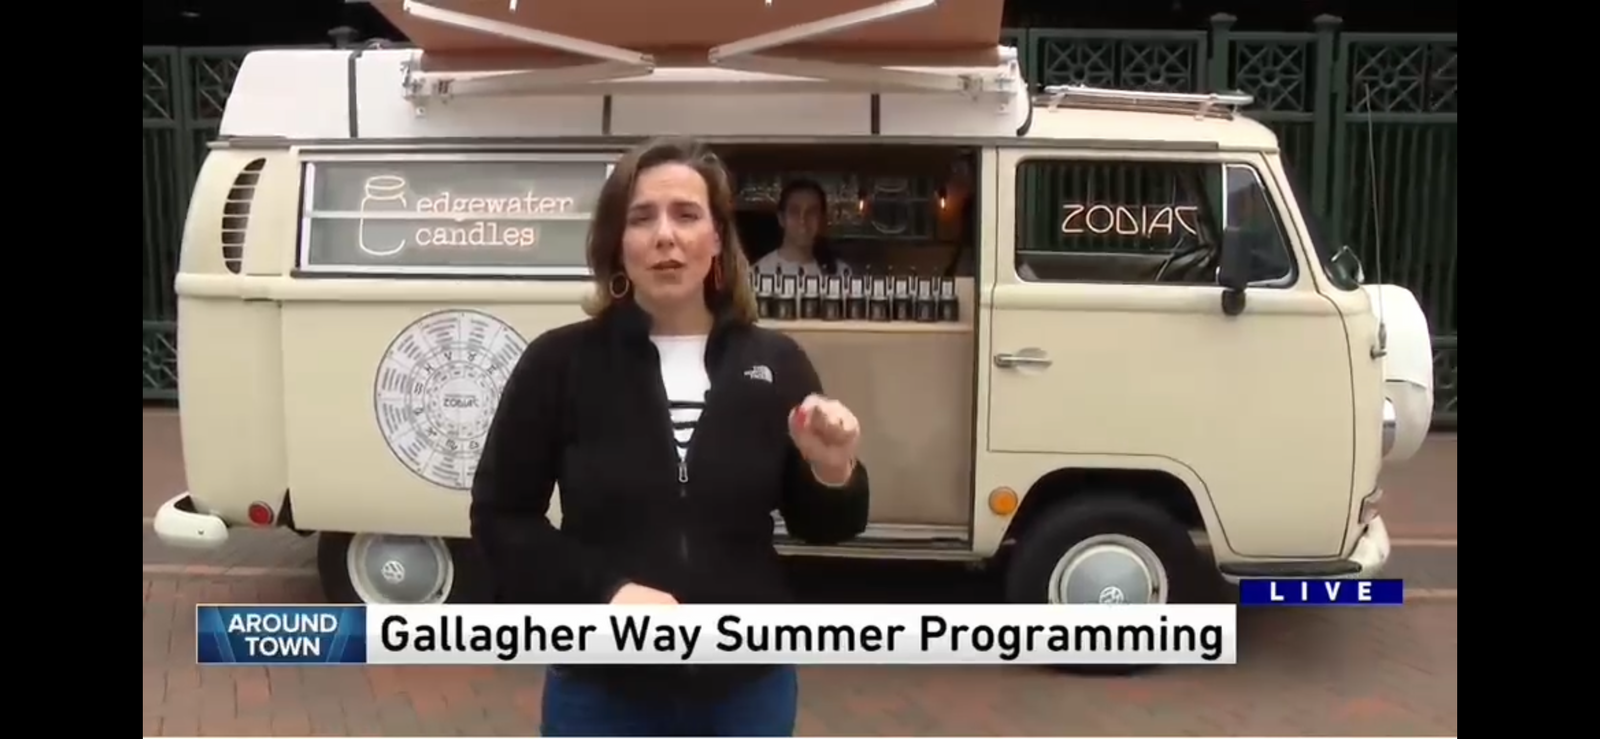 WGN features the Gallagher Way French Market & Edgewater Candles!